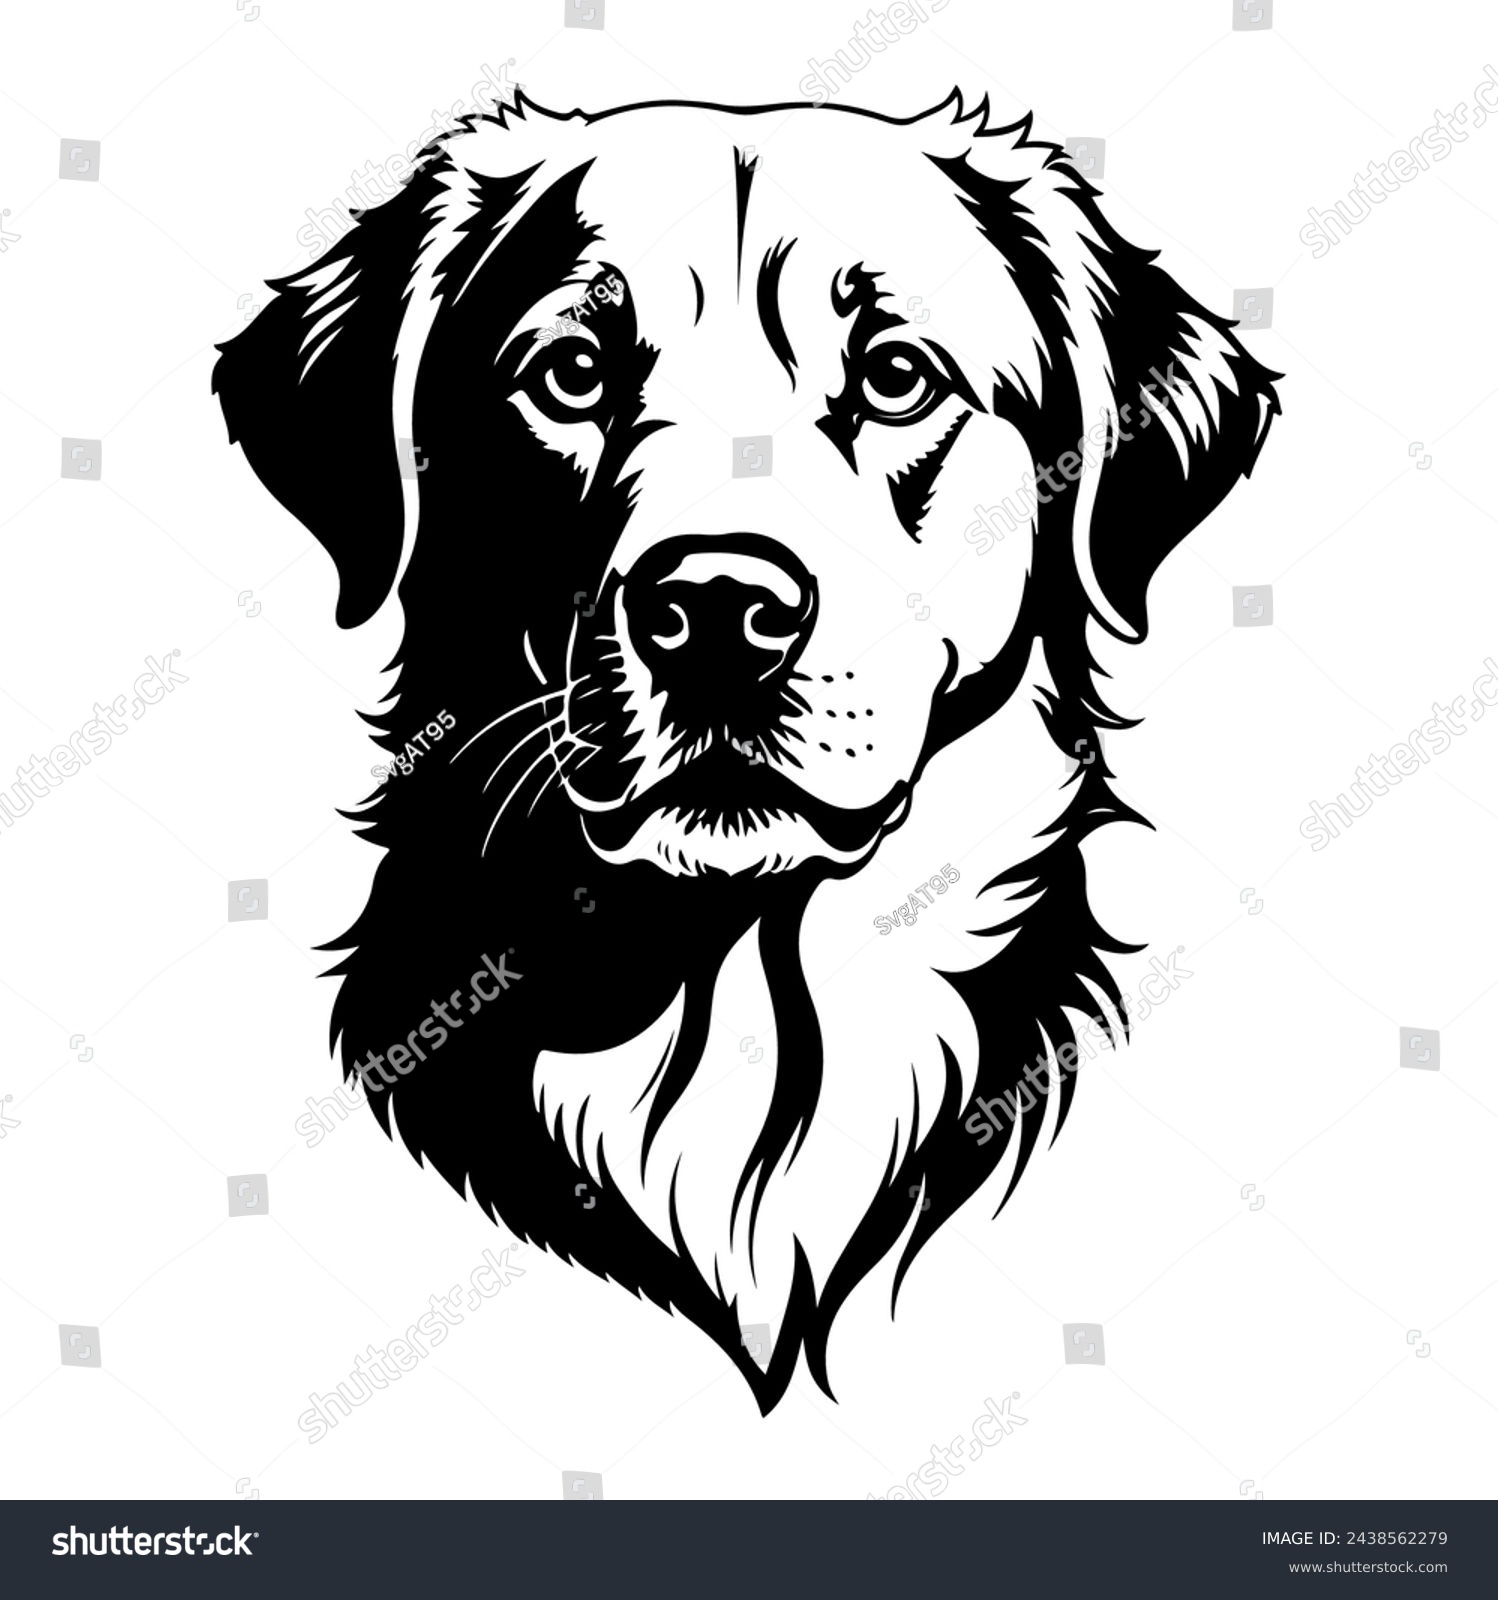 SVG of Portrait of a Anatolian Shepherd Dog Vector isolated on white background, Dog Silhouettes. svg